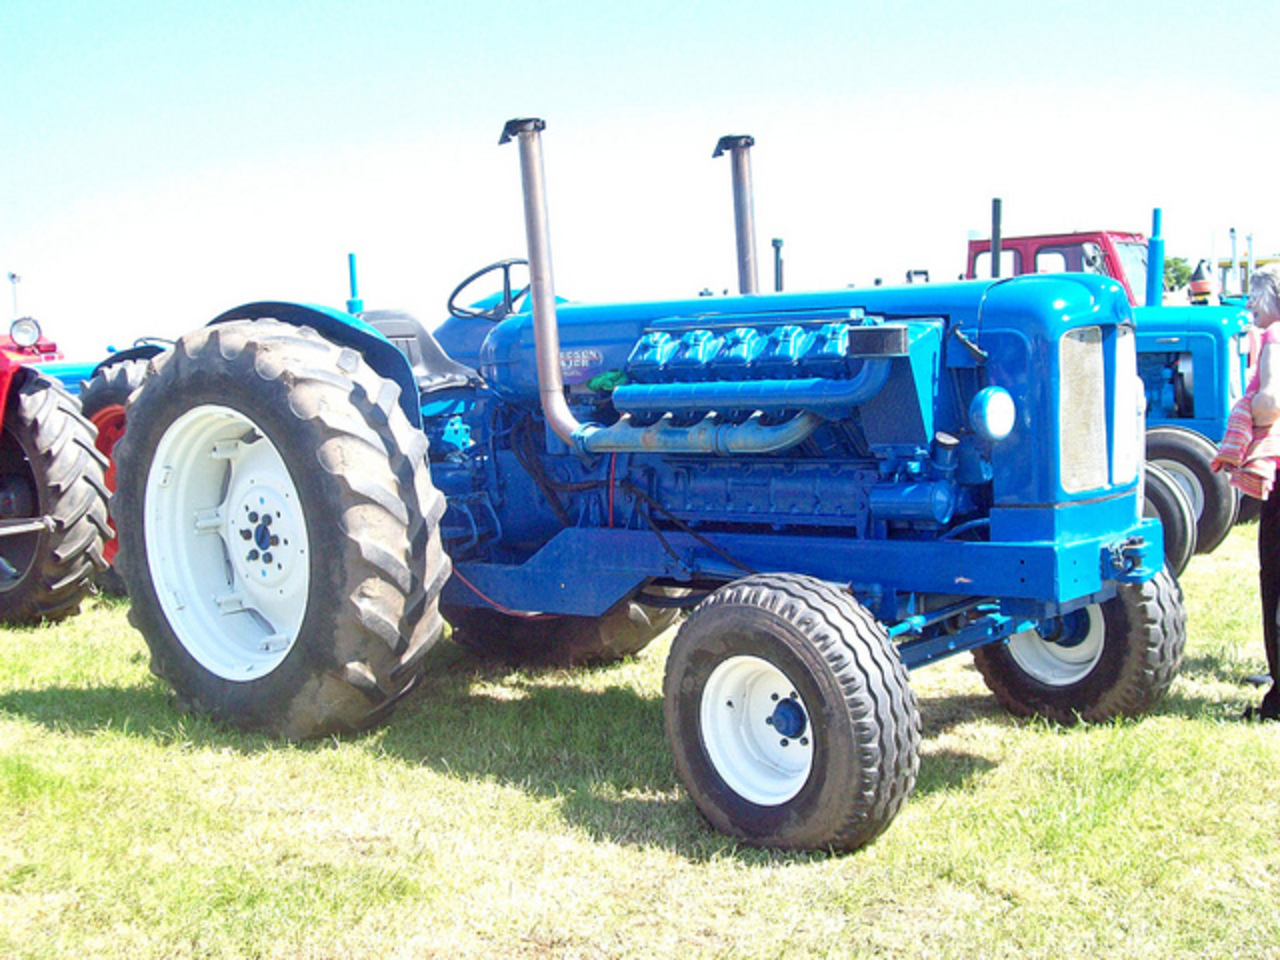 64 Fordson Major Tractor | Flickr - Photo Sharing!